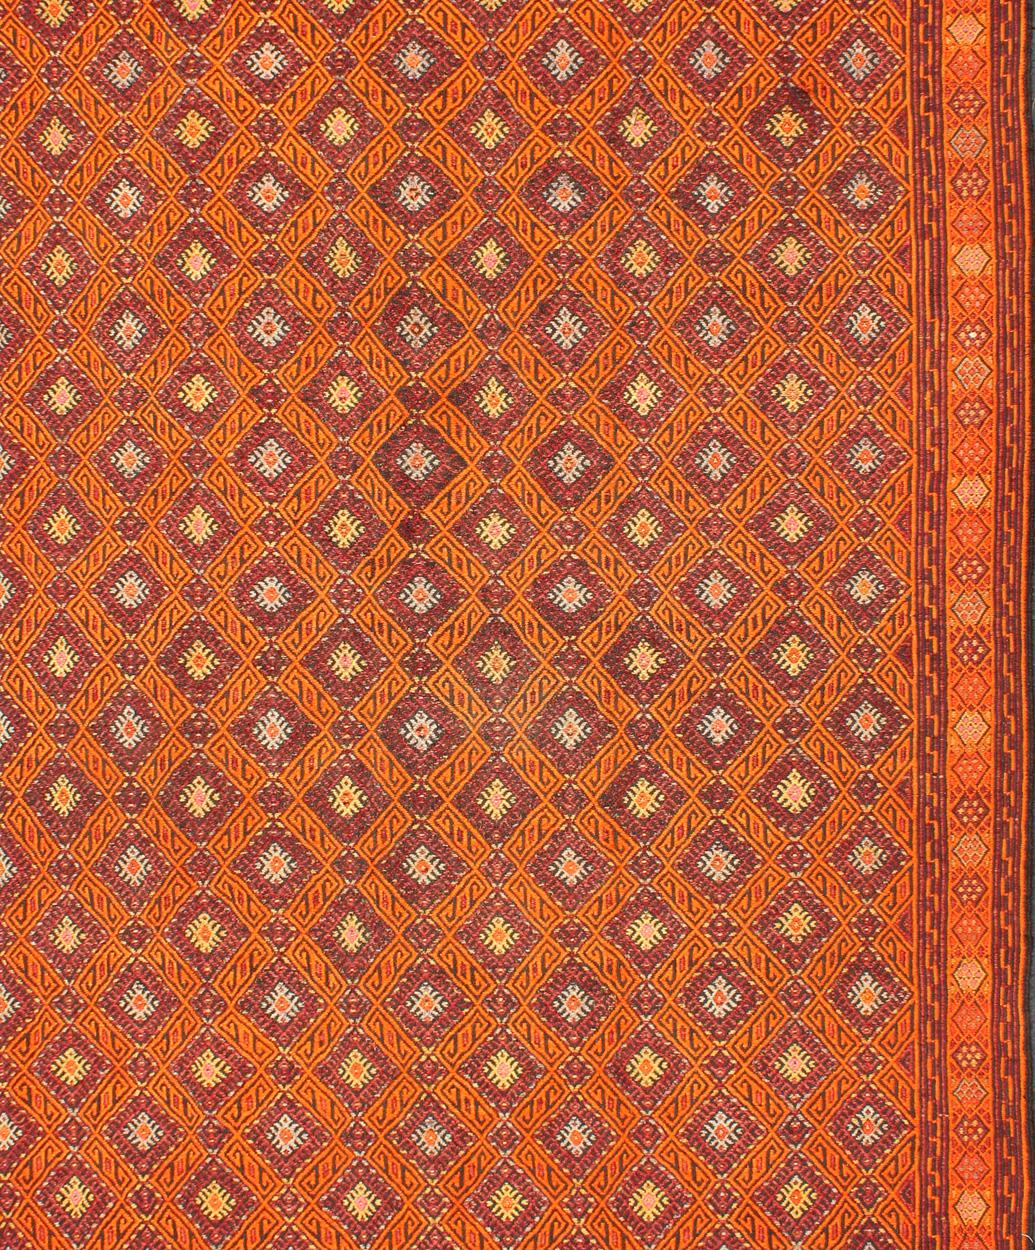 Turkish Vintage Embroidered Kilim in Orange, Red, light Blue and yellow Colors